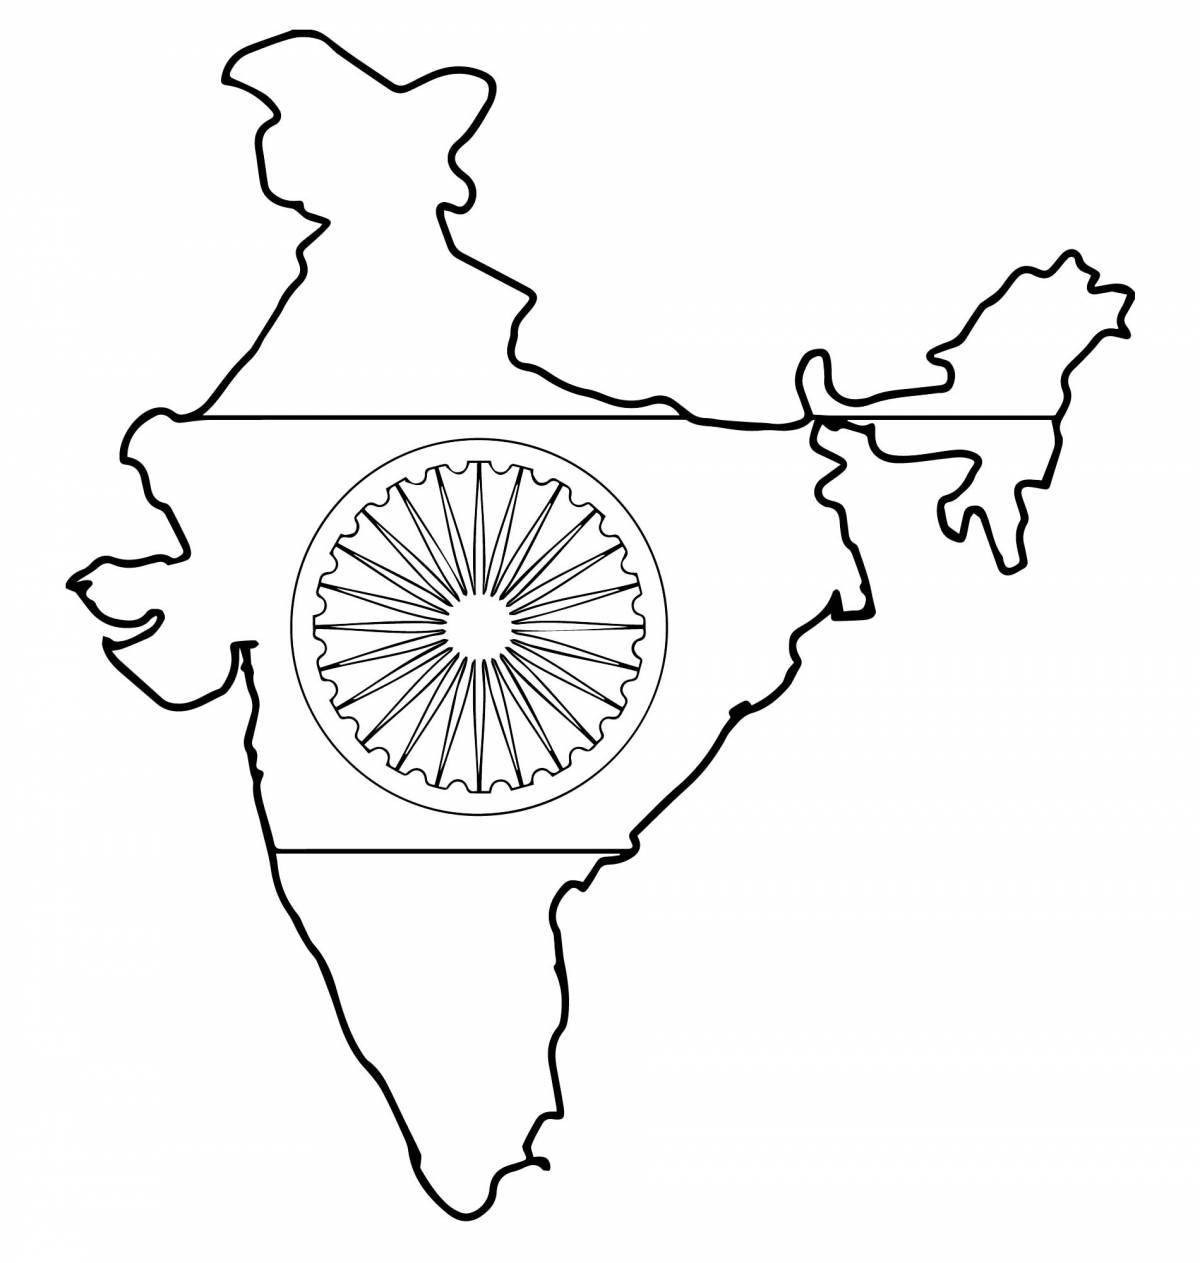 Coloring page cheerful flag of india